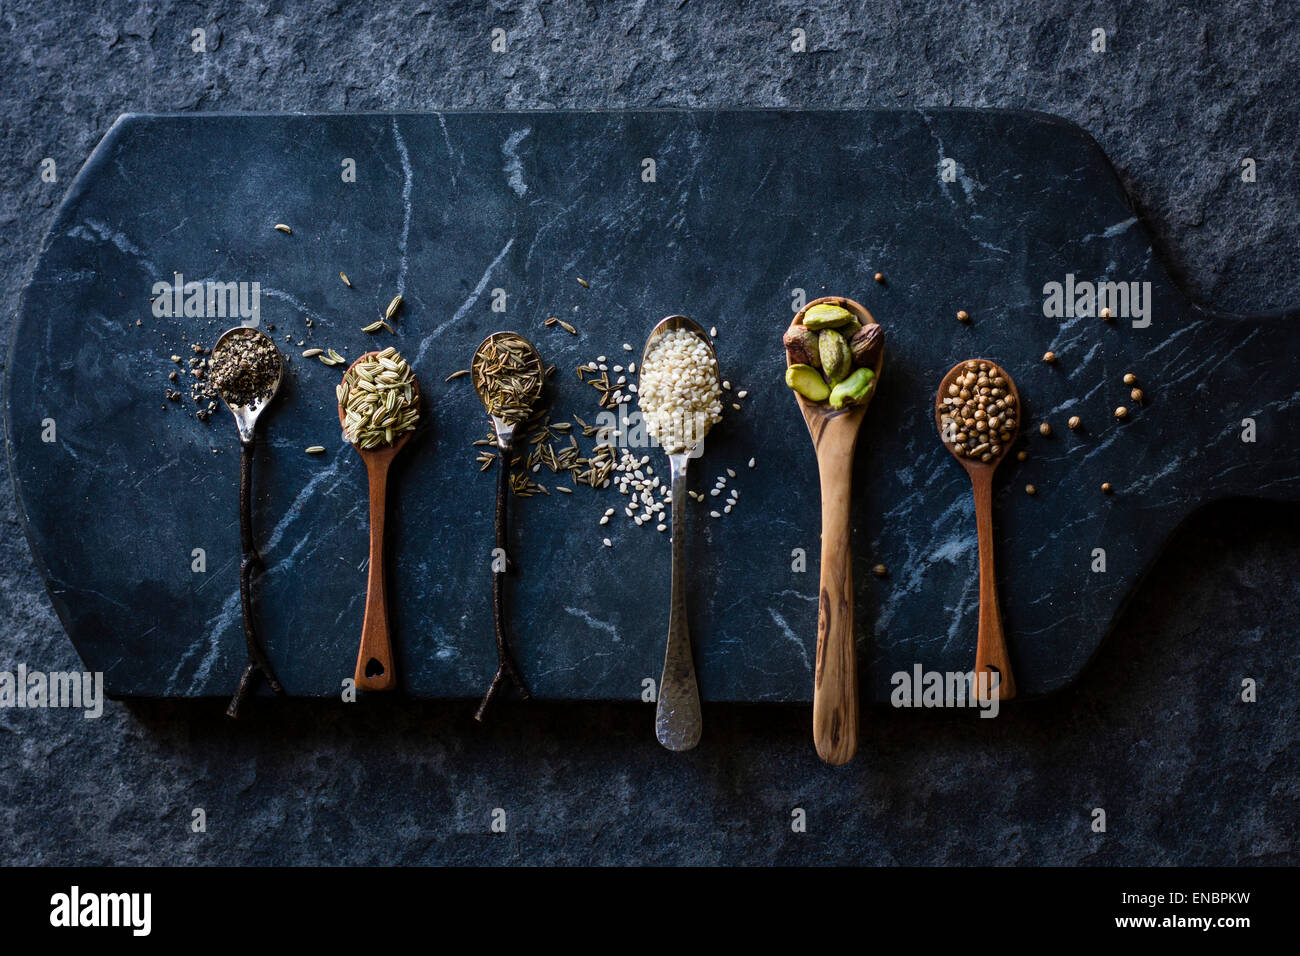 Grains, seeds and nuts on spoons Stock Photo